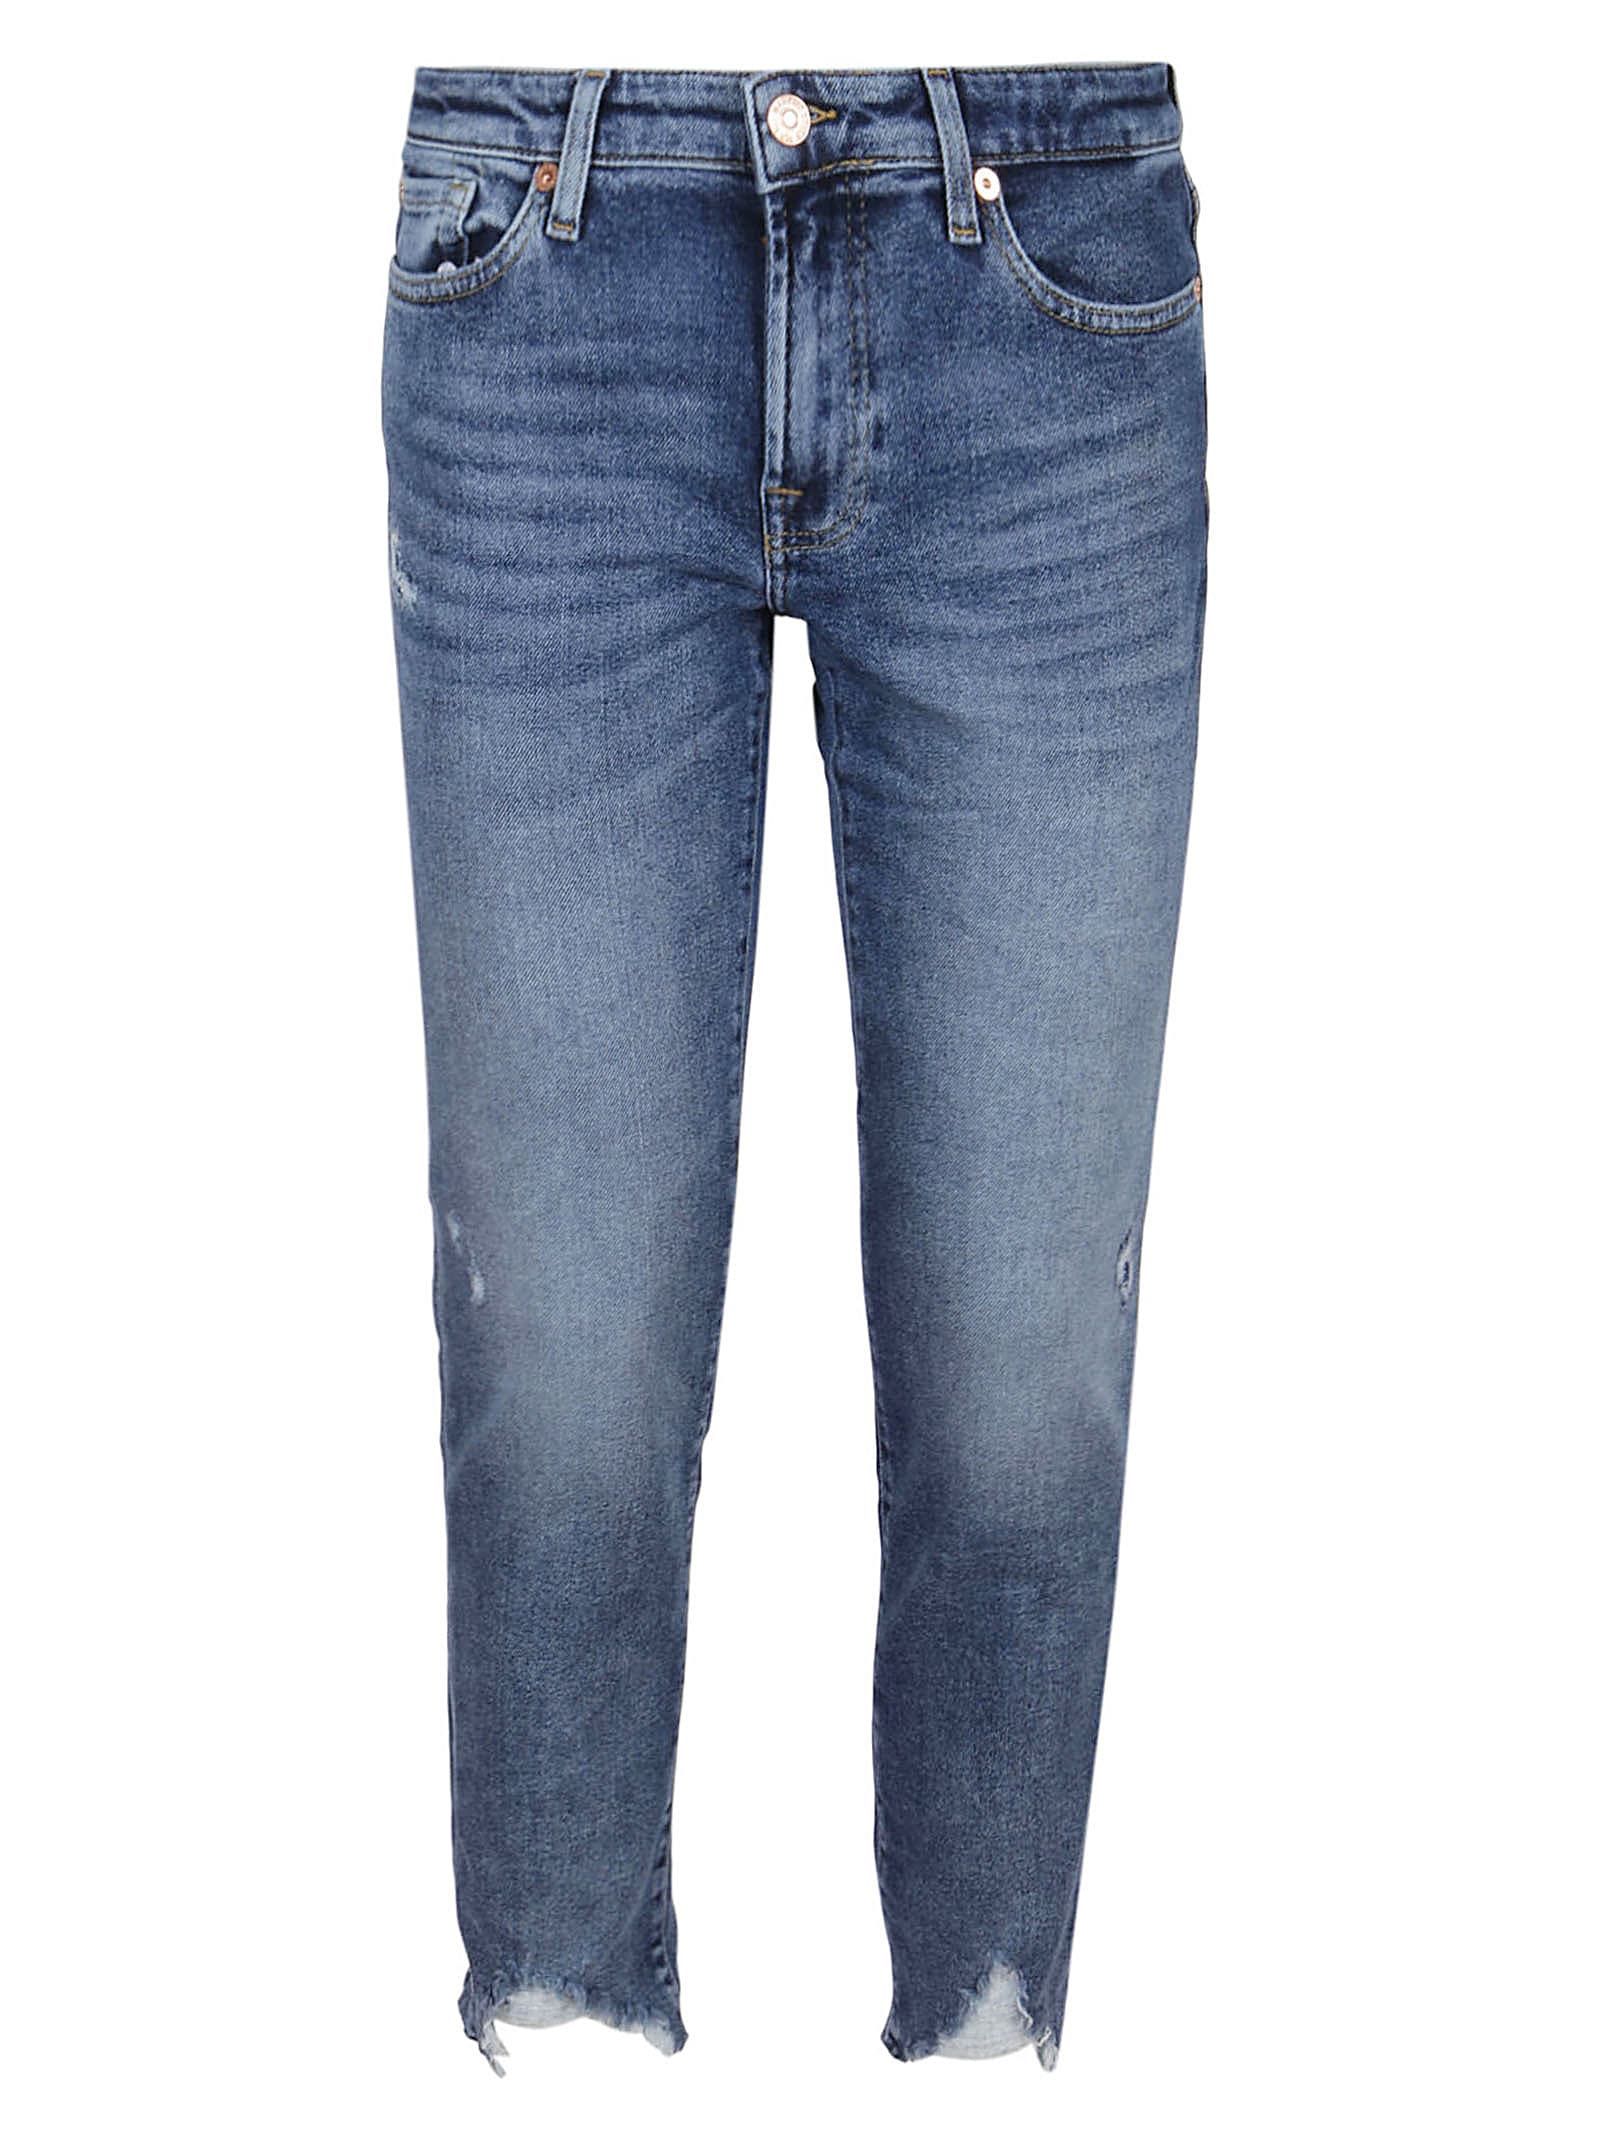 7 For All Mankind Pyper Cropluxe Vintage